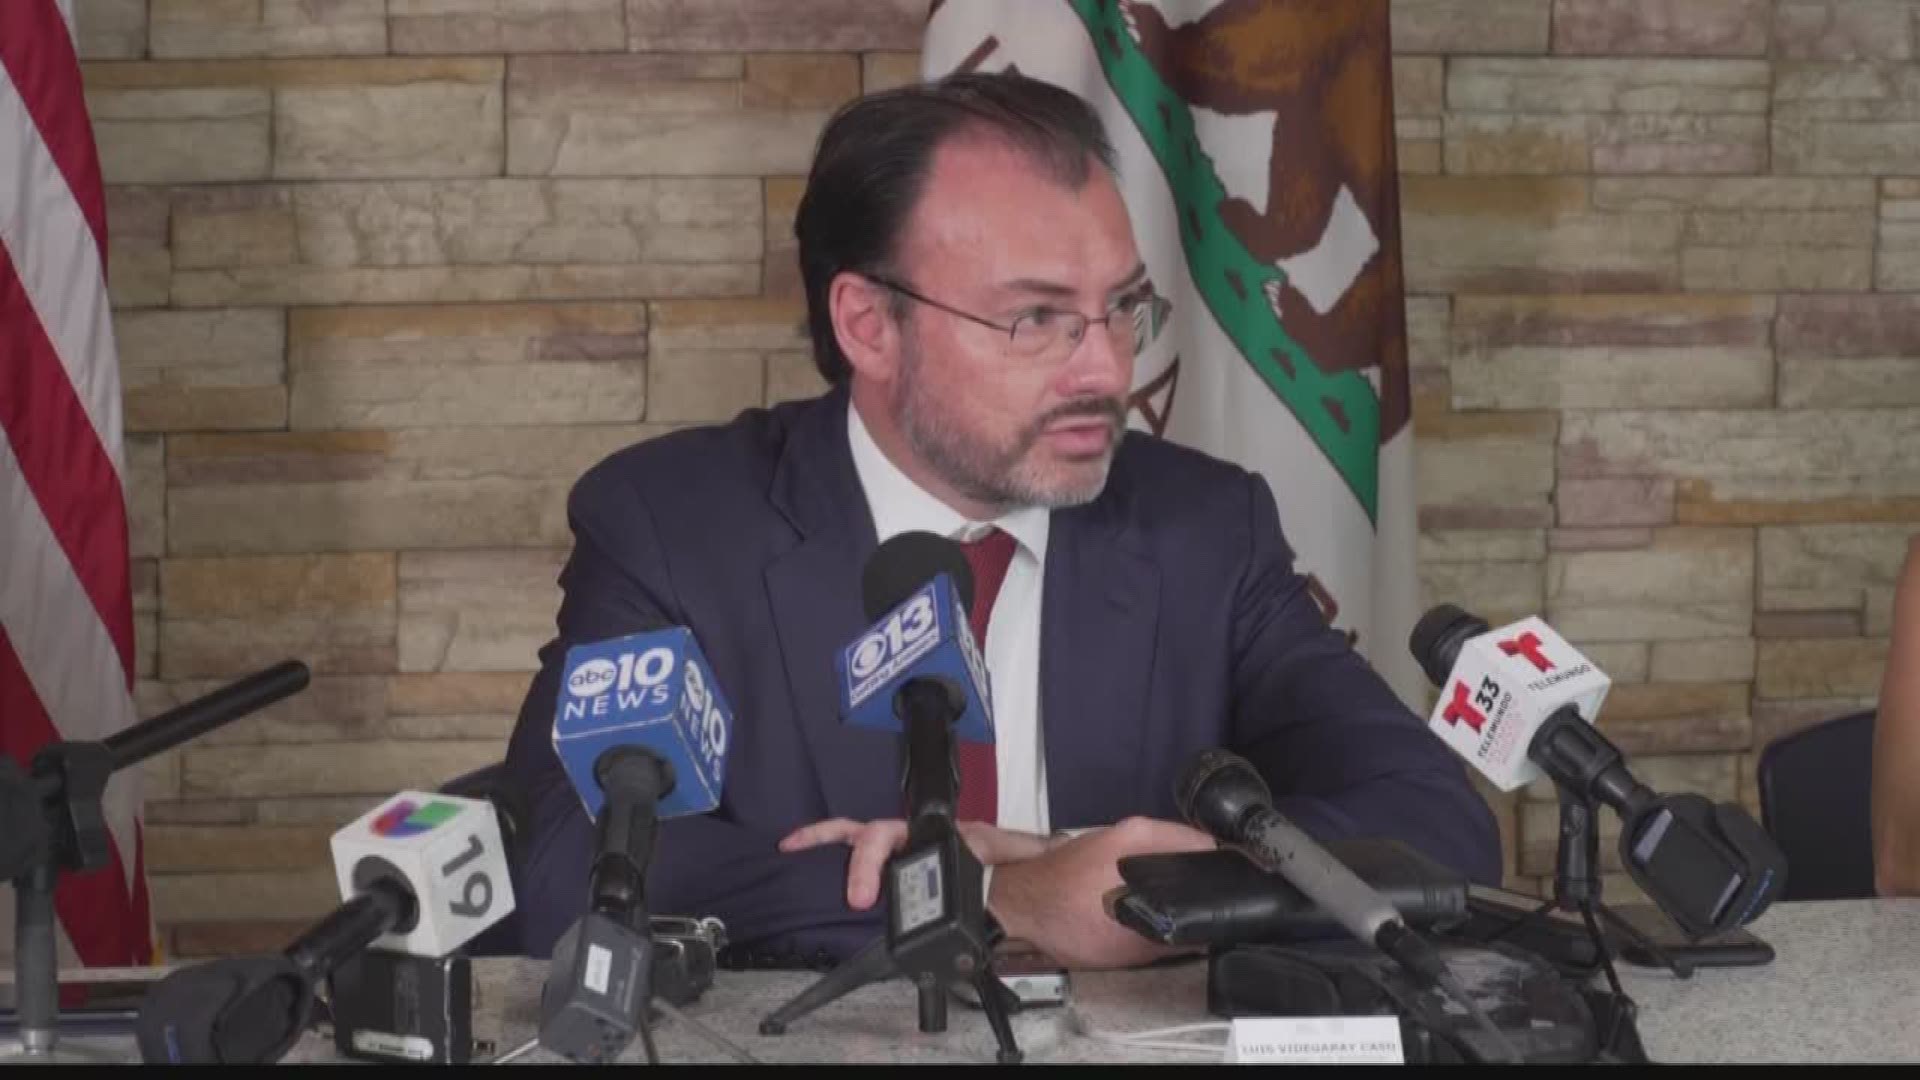 Top Mexican official speaks out about the president's DACA decision while in Sacramento.